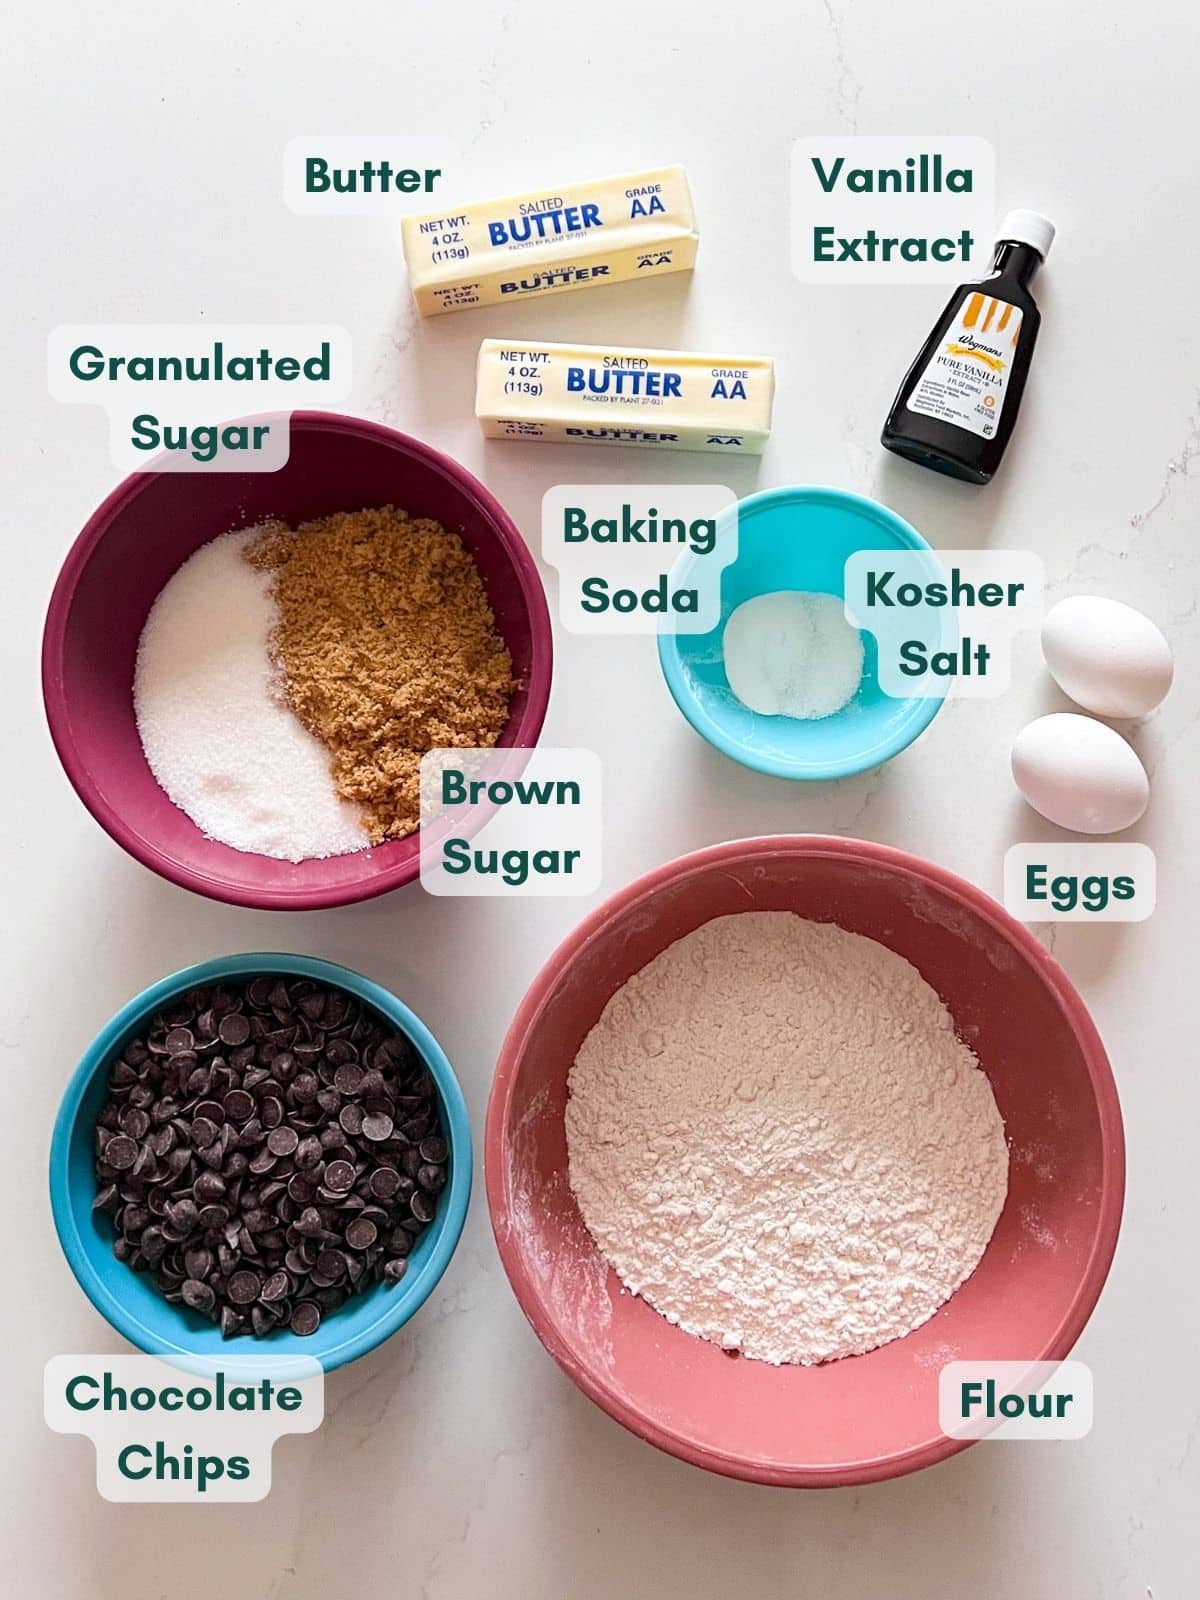 An overhead image of all the ingredients for these cookies.